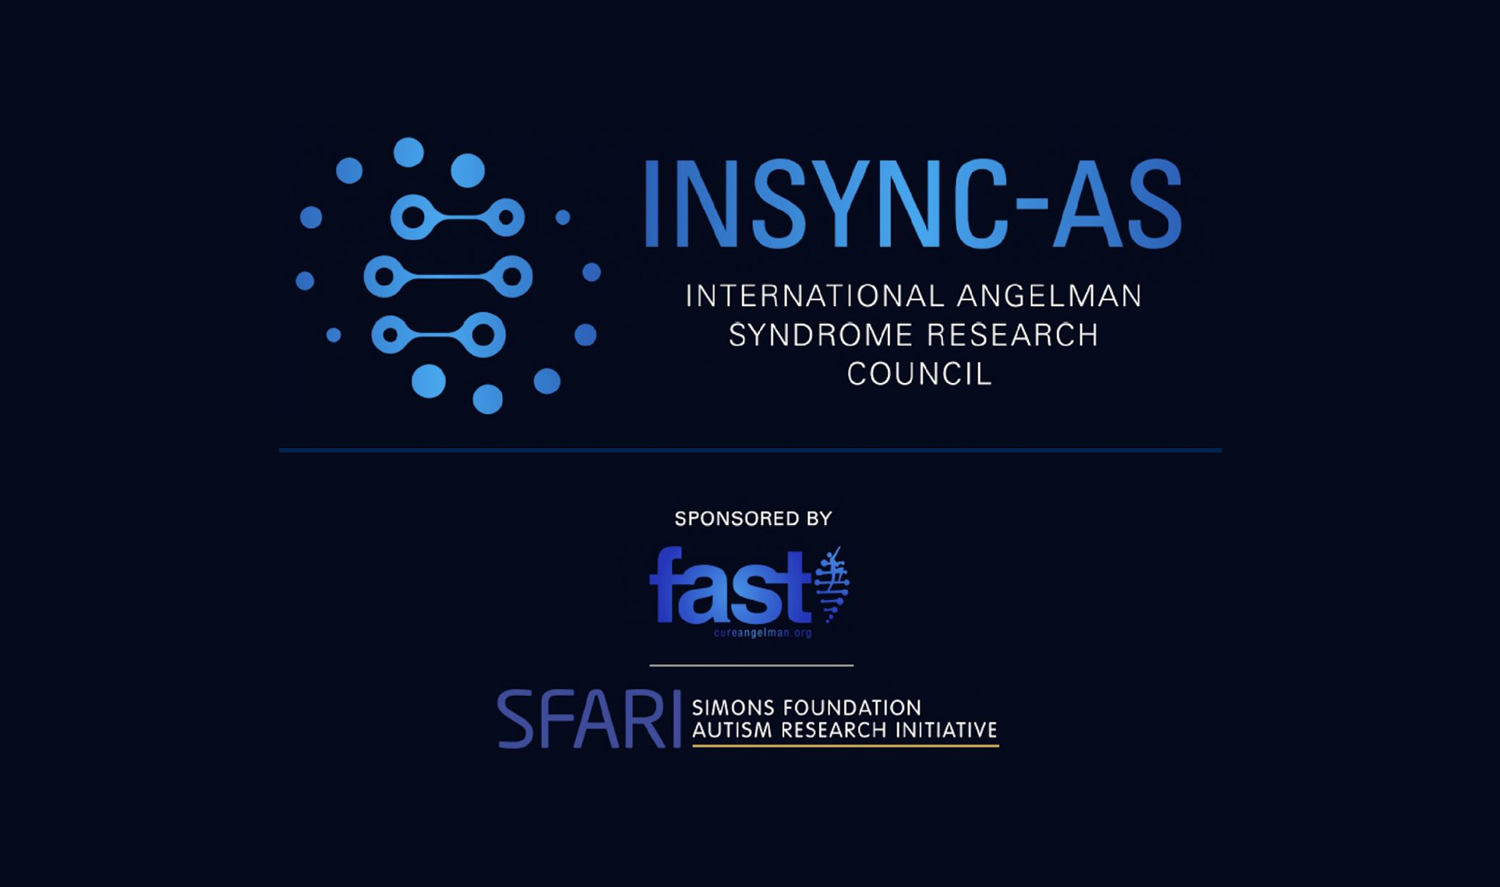 INSYNC-AS: A collaboration between FAST and the Simons Foundation Autism Research Initiative (SFARI)